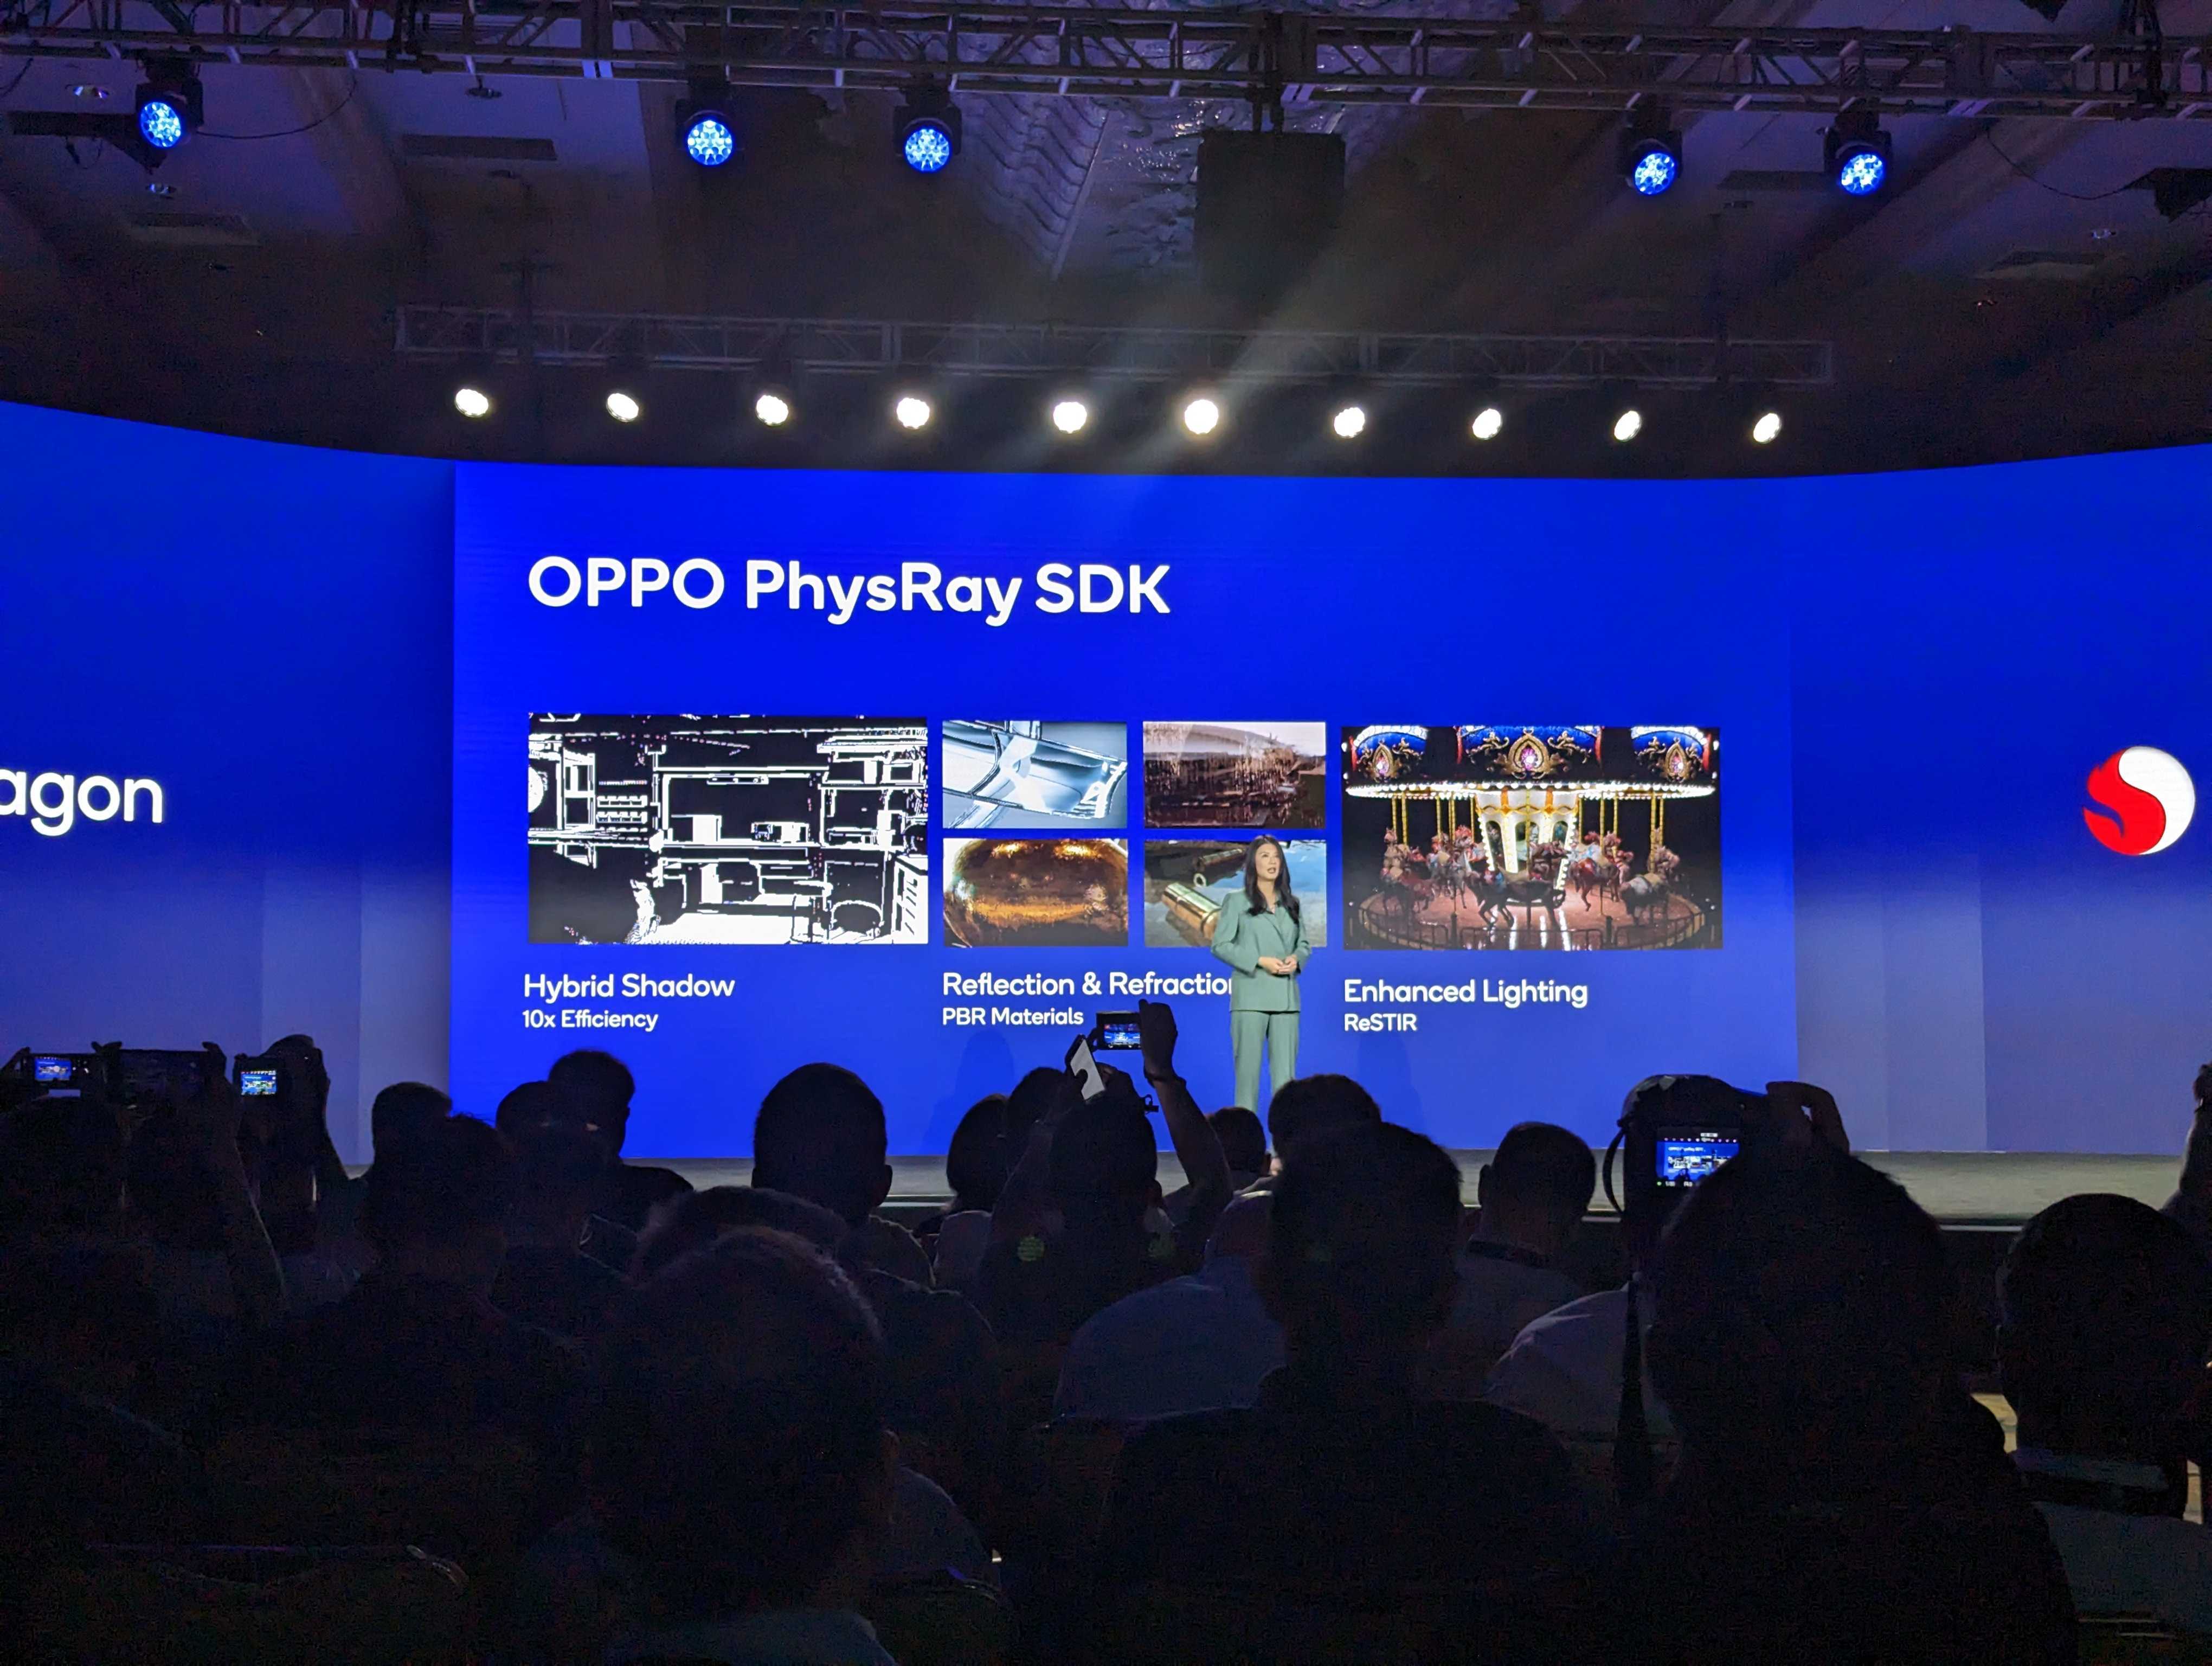 Oppo's Jane Tian on stage at the Qualcomm Snapdragon Summit 2022, talking about the PhysRay SDK slide 2